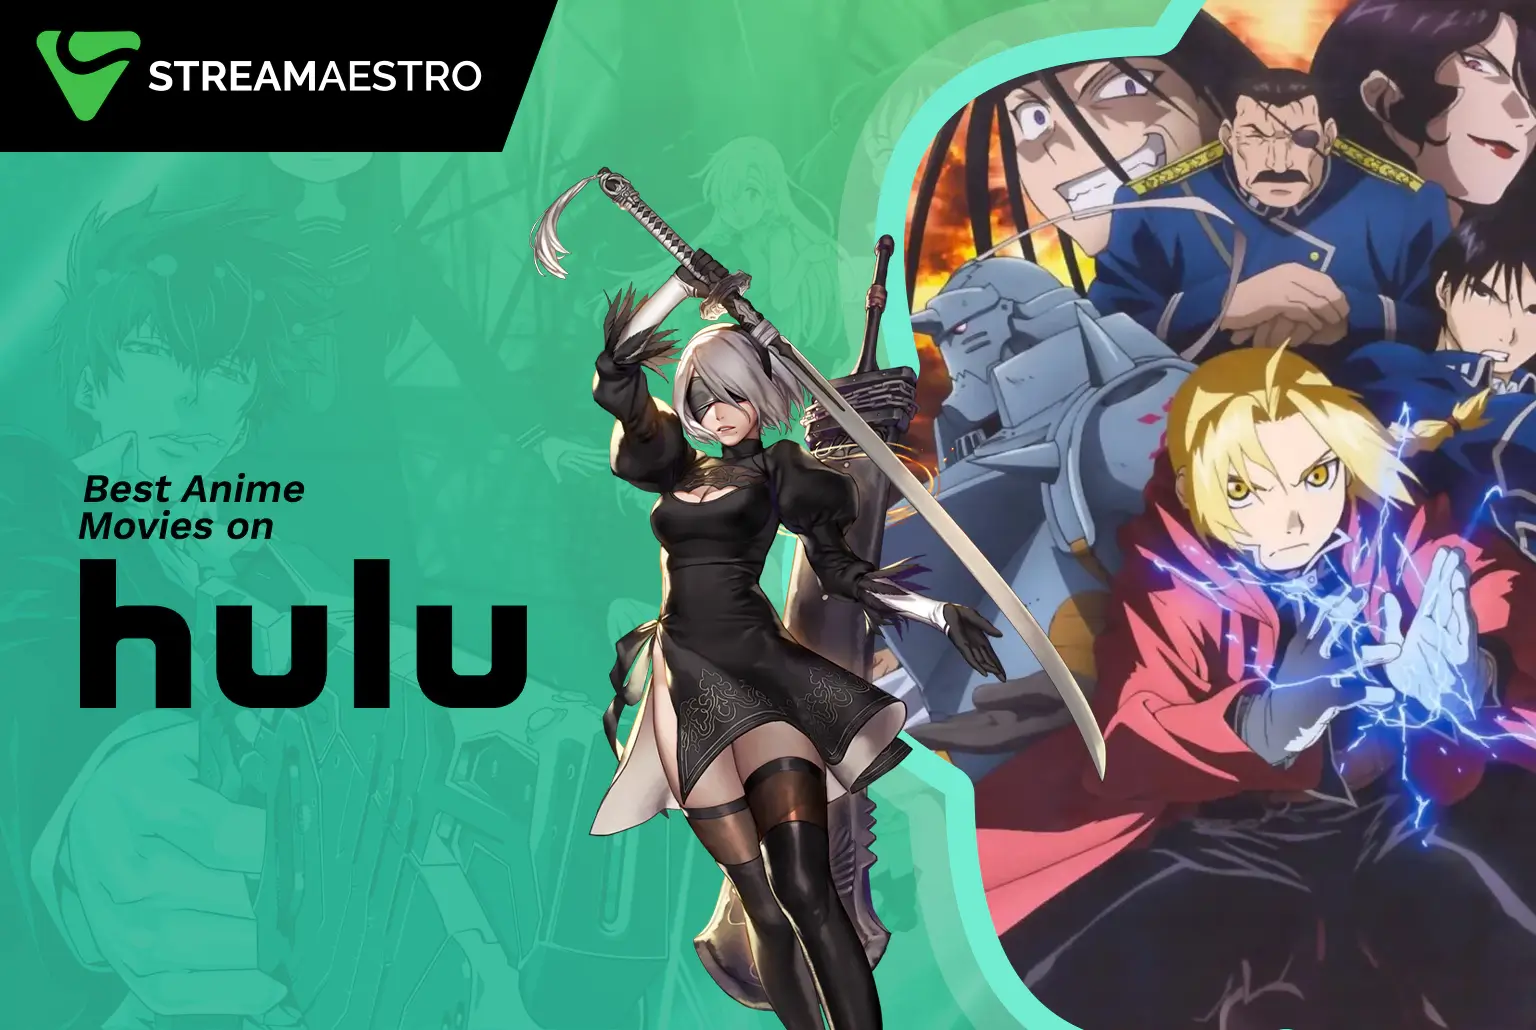 Best Anime Shows on Hulu